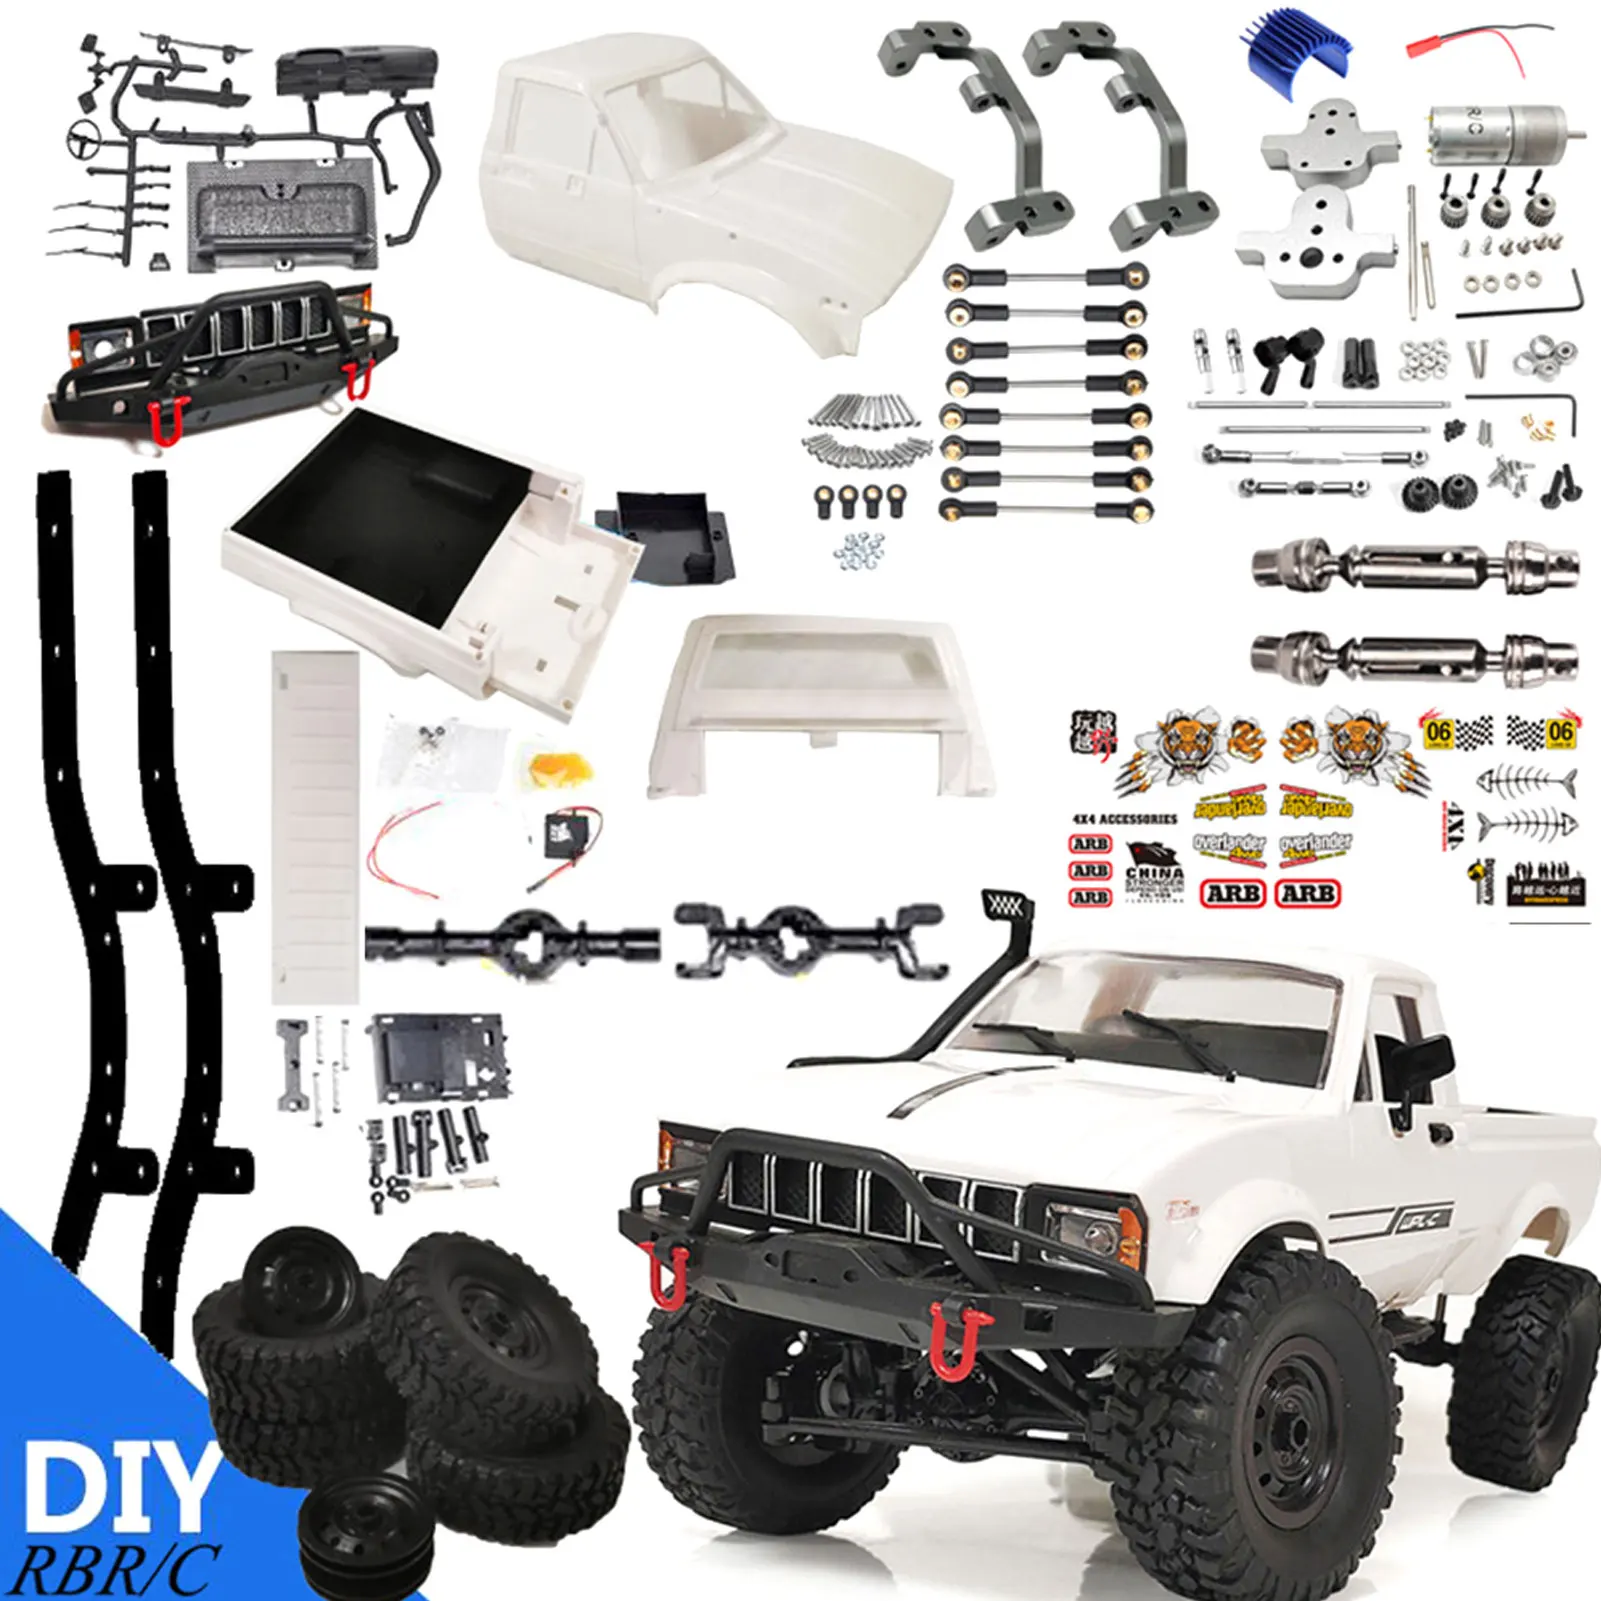 

Truck Model Toys 4WD Racing Kids Gift Pickup Remote Control RC Car Children Climbing Vehicle Speed Electric DIY For WPL C24-1